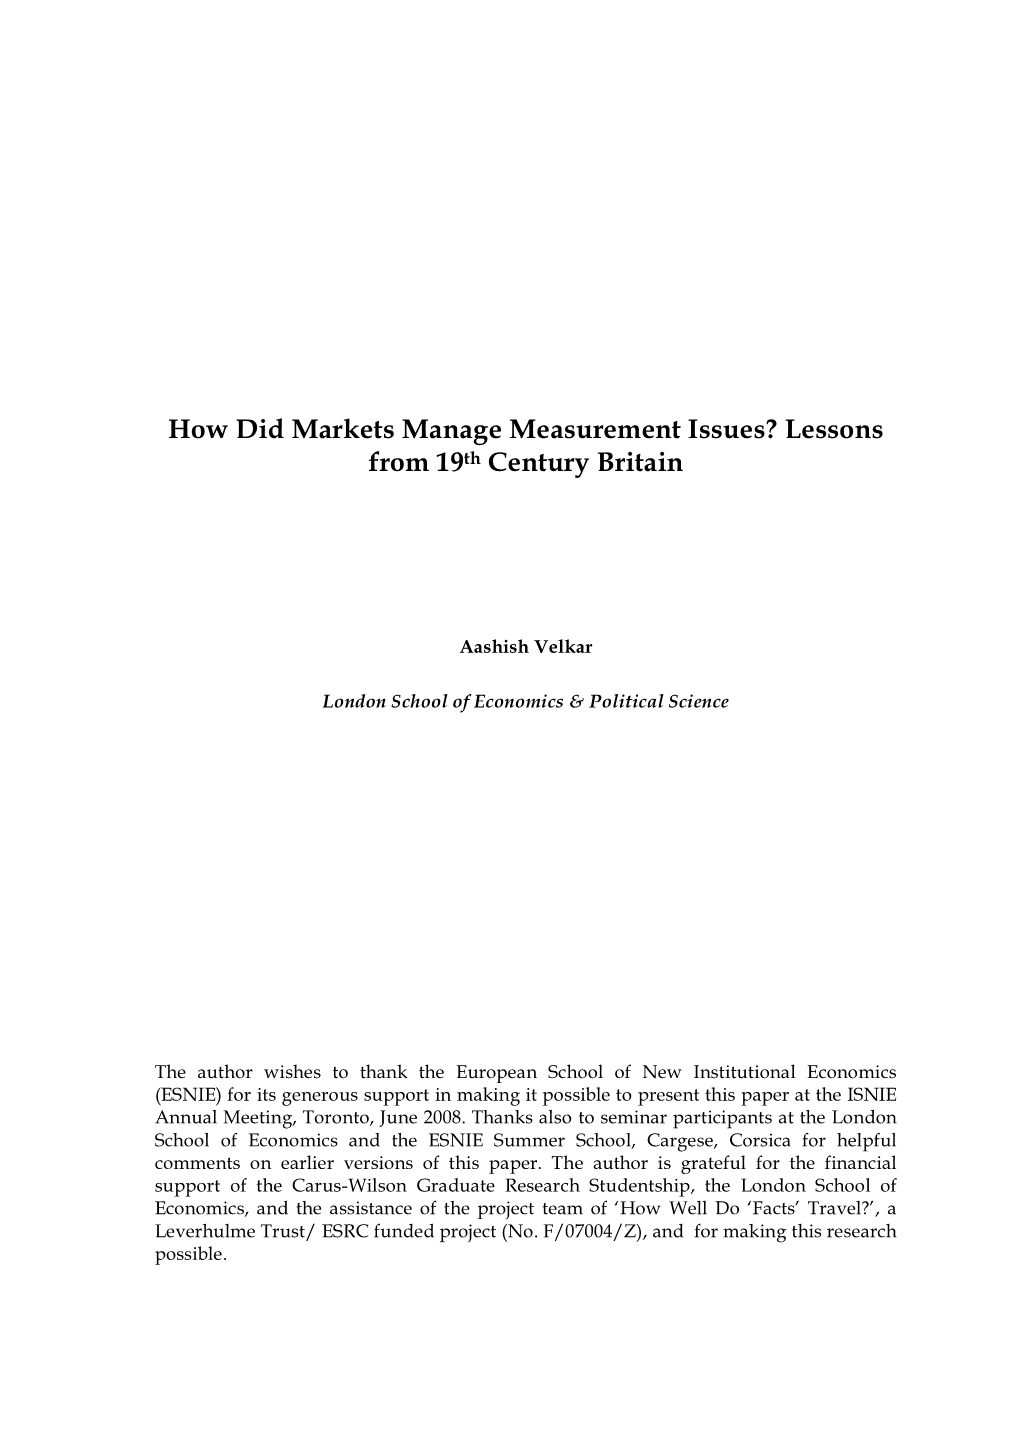 How Did Markets Manage Measurement Issues? Lessons from 19Th Century Britain